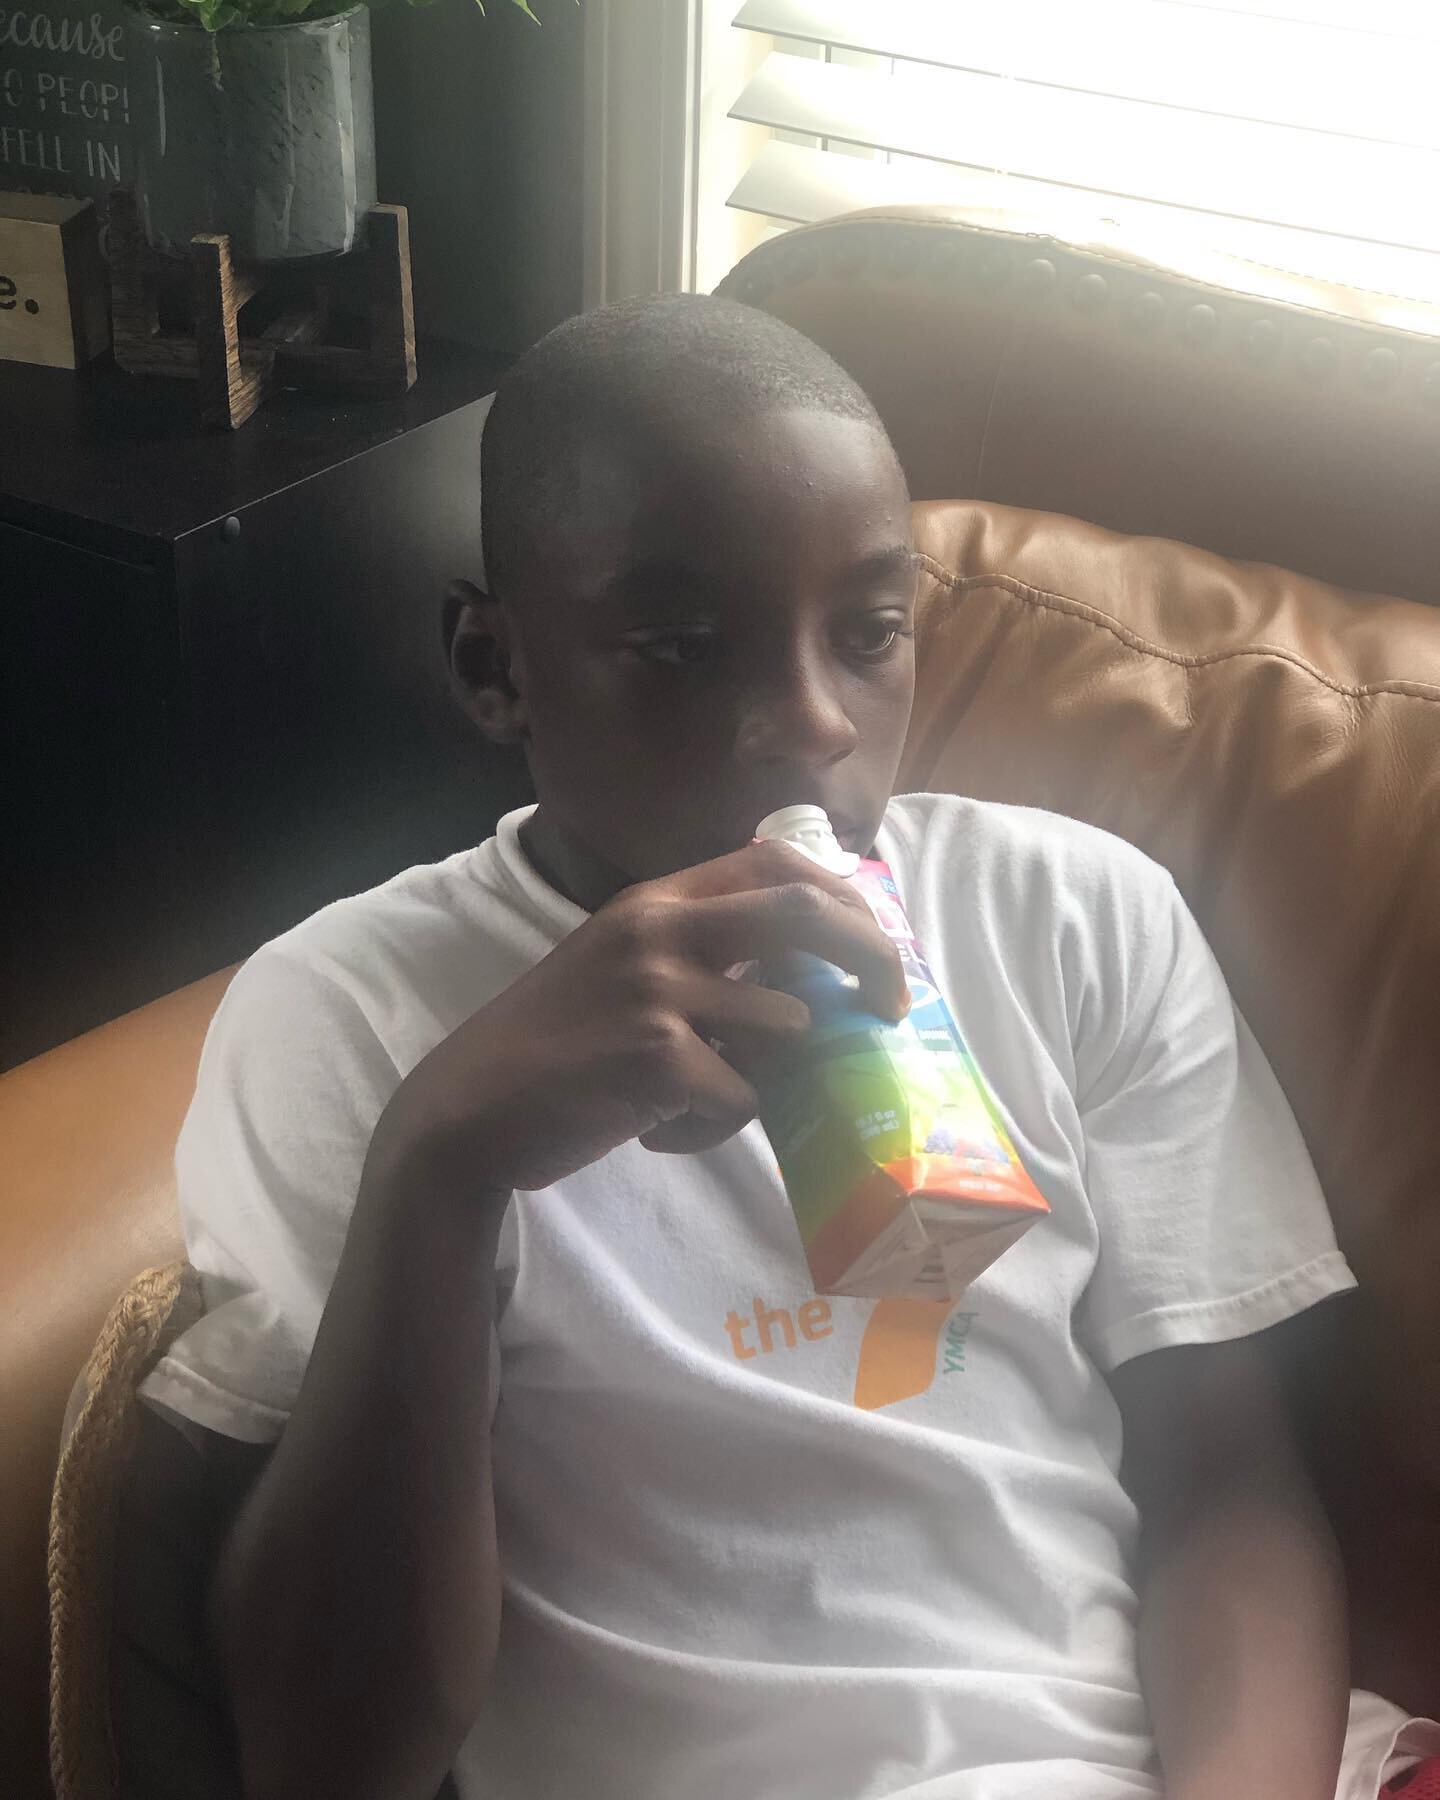 You can&rsquo;t be the #1 eleven year old in the state without proper hydration! JET athlete Marcus Love NC#1 in the 400 and 800 fueling up for his next mission with @biosteelsports JET&hellip; come fly with us!